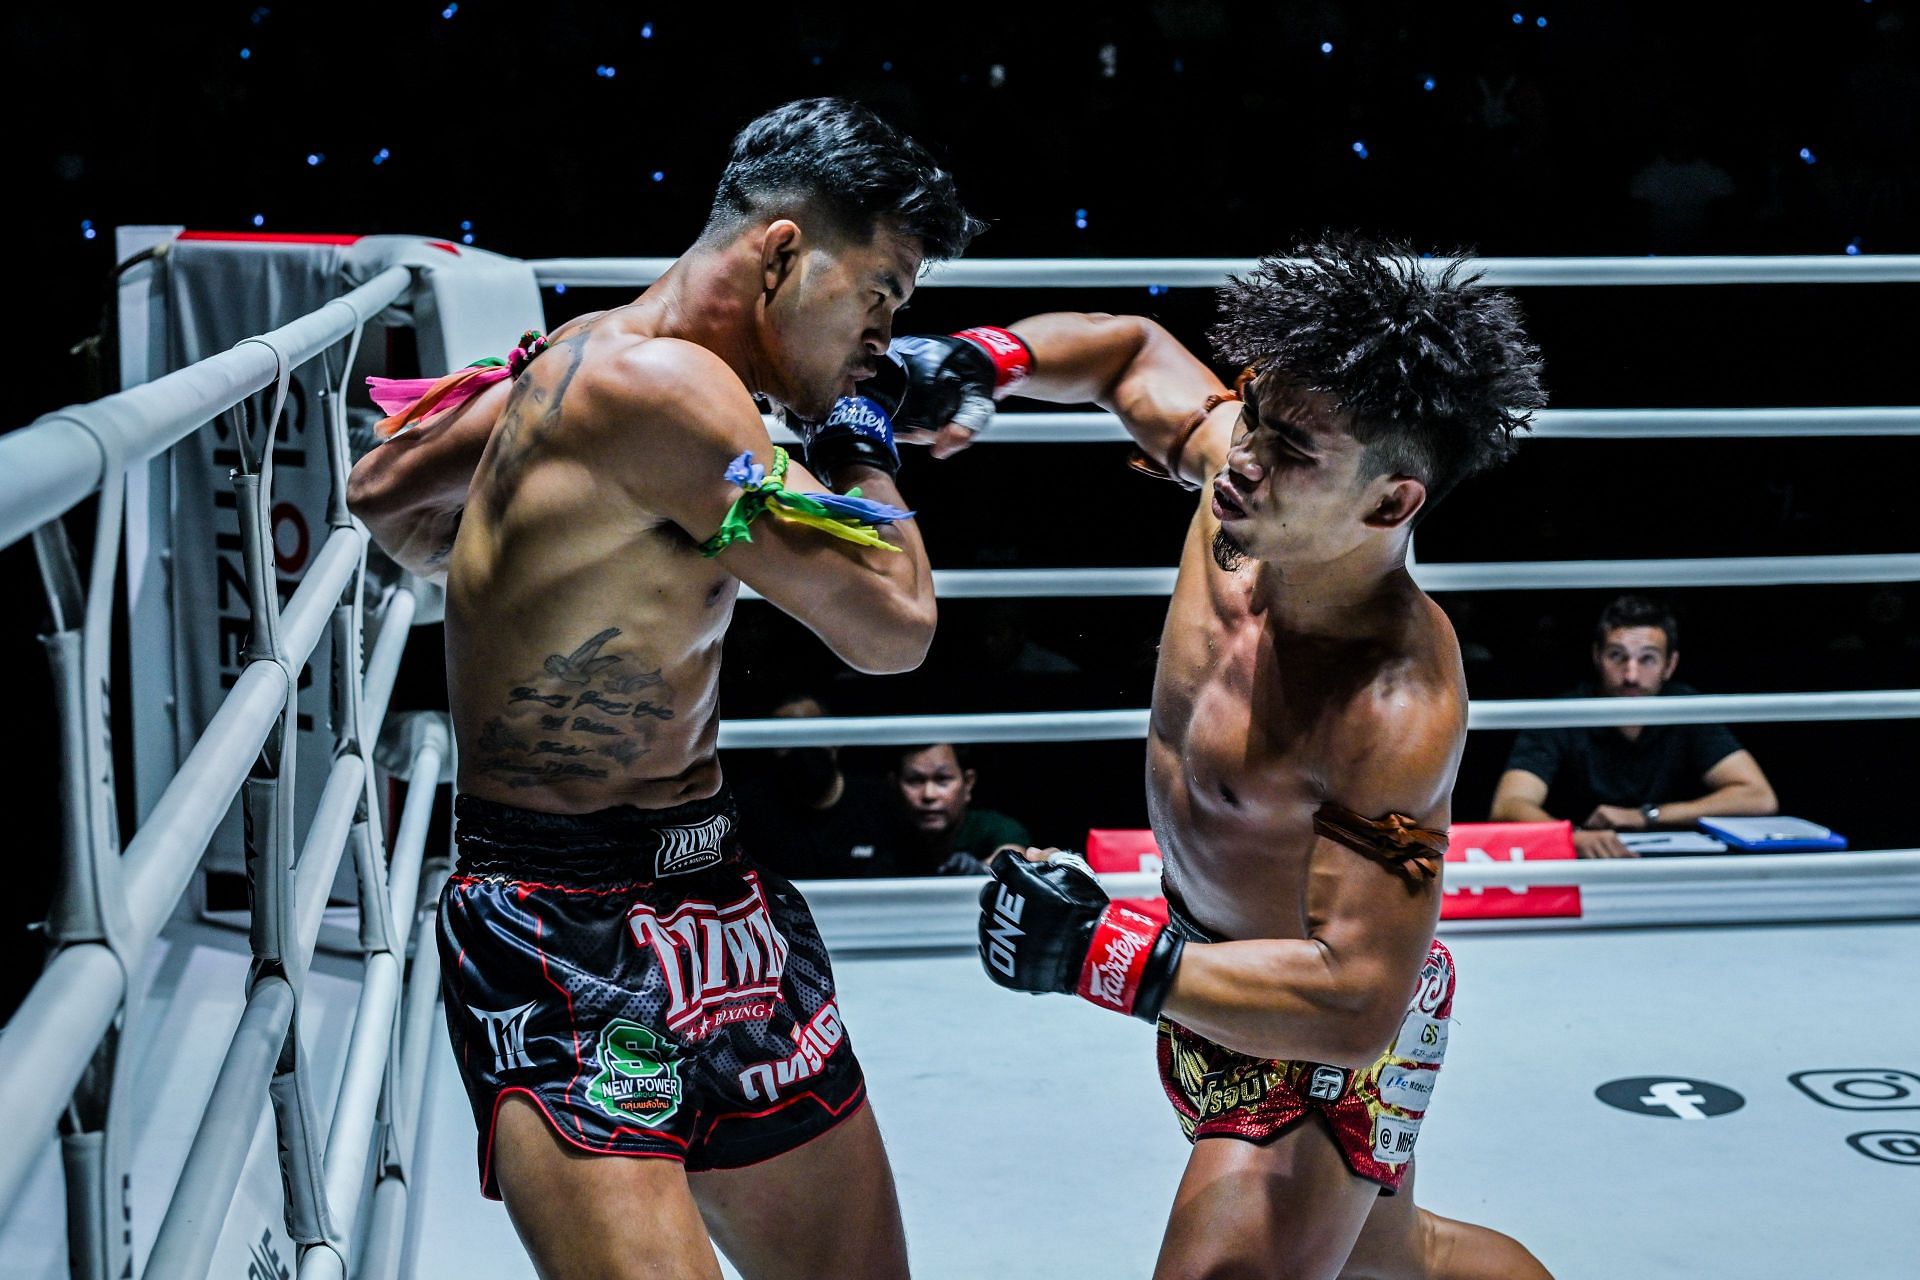 Suriyanlek (R) lands a massive right hand over Rittidet | Photo by ONE Championship